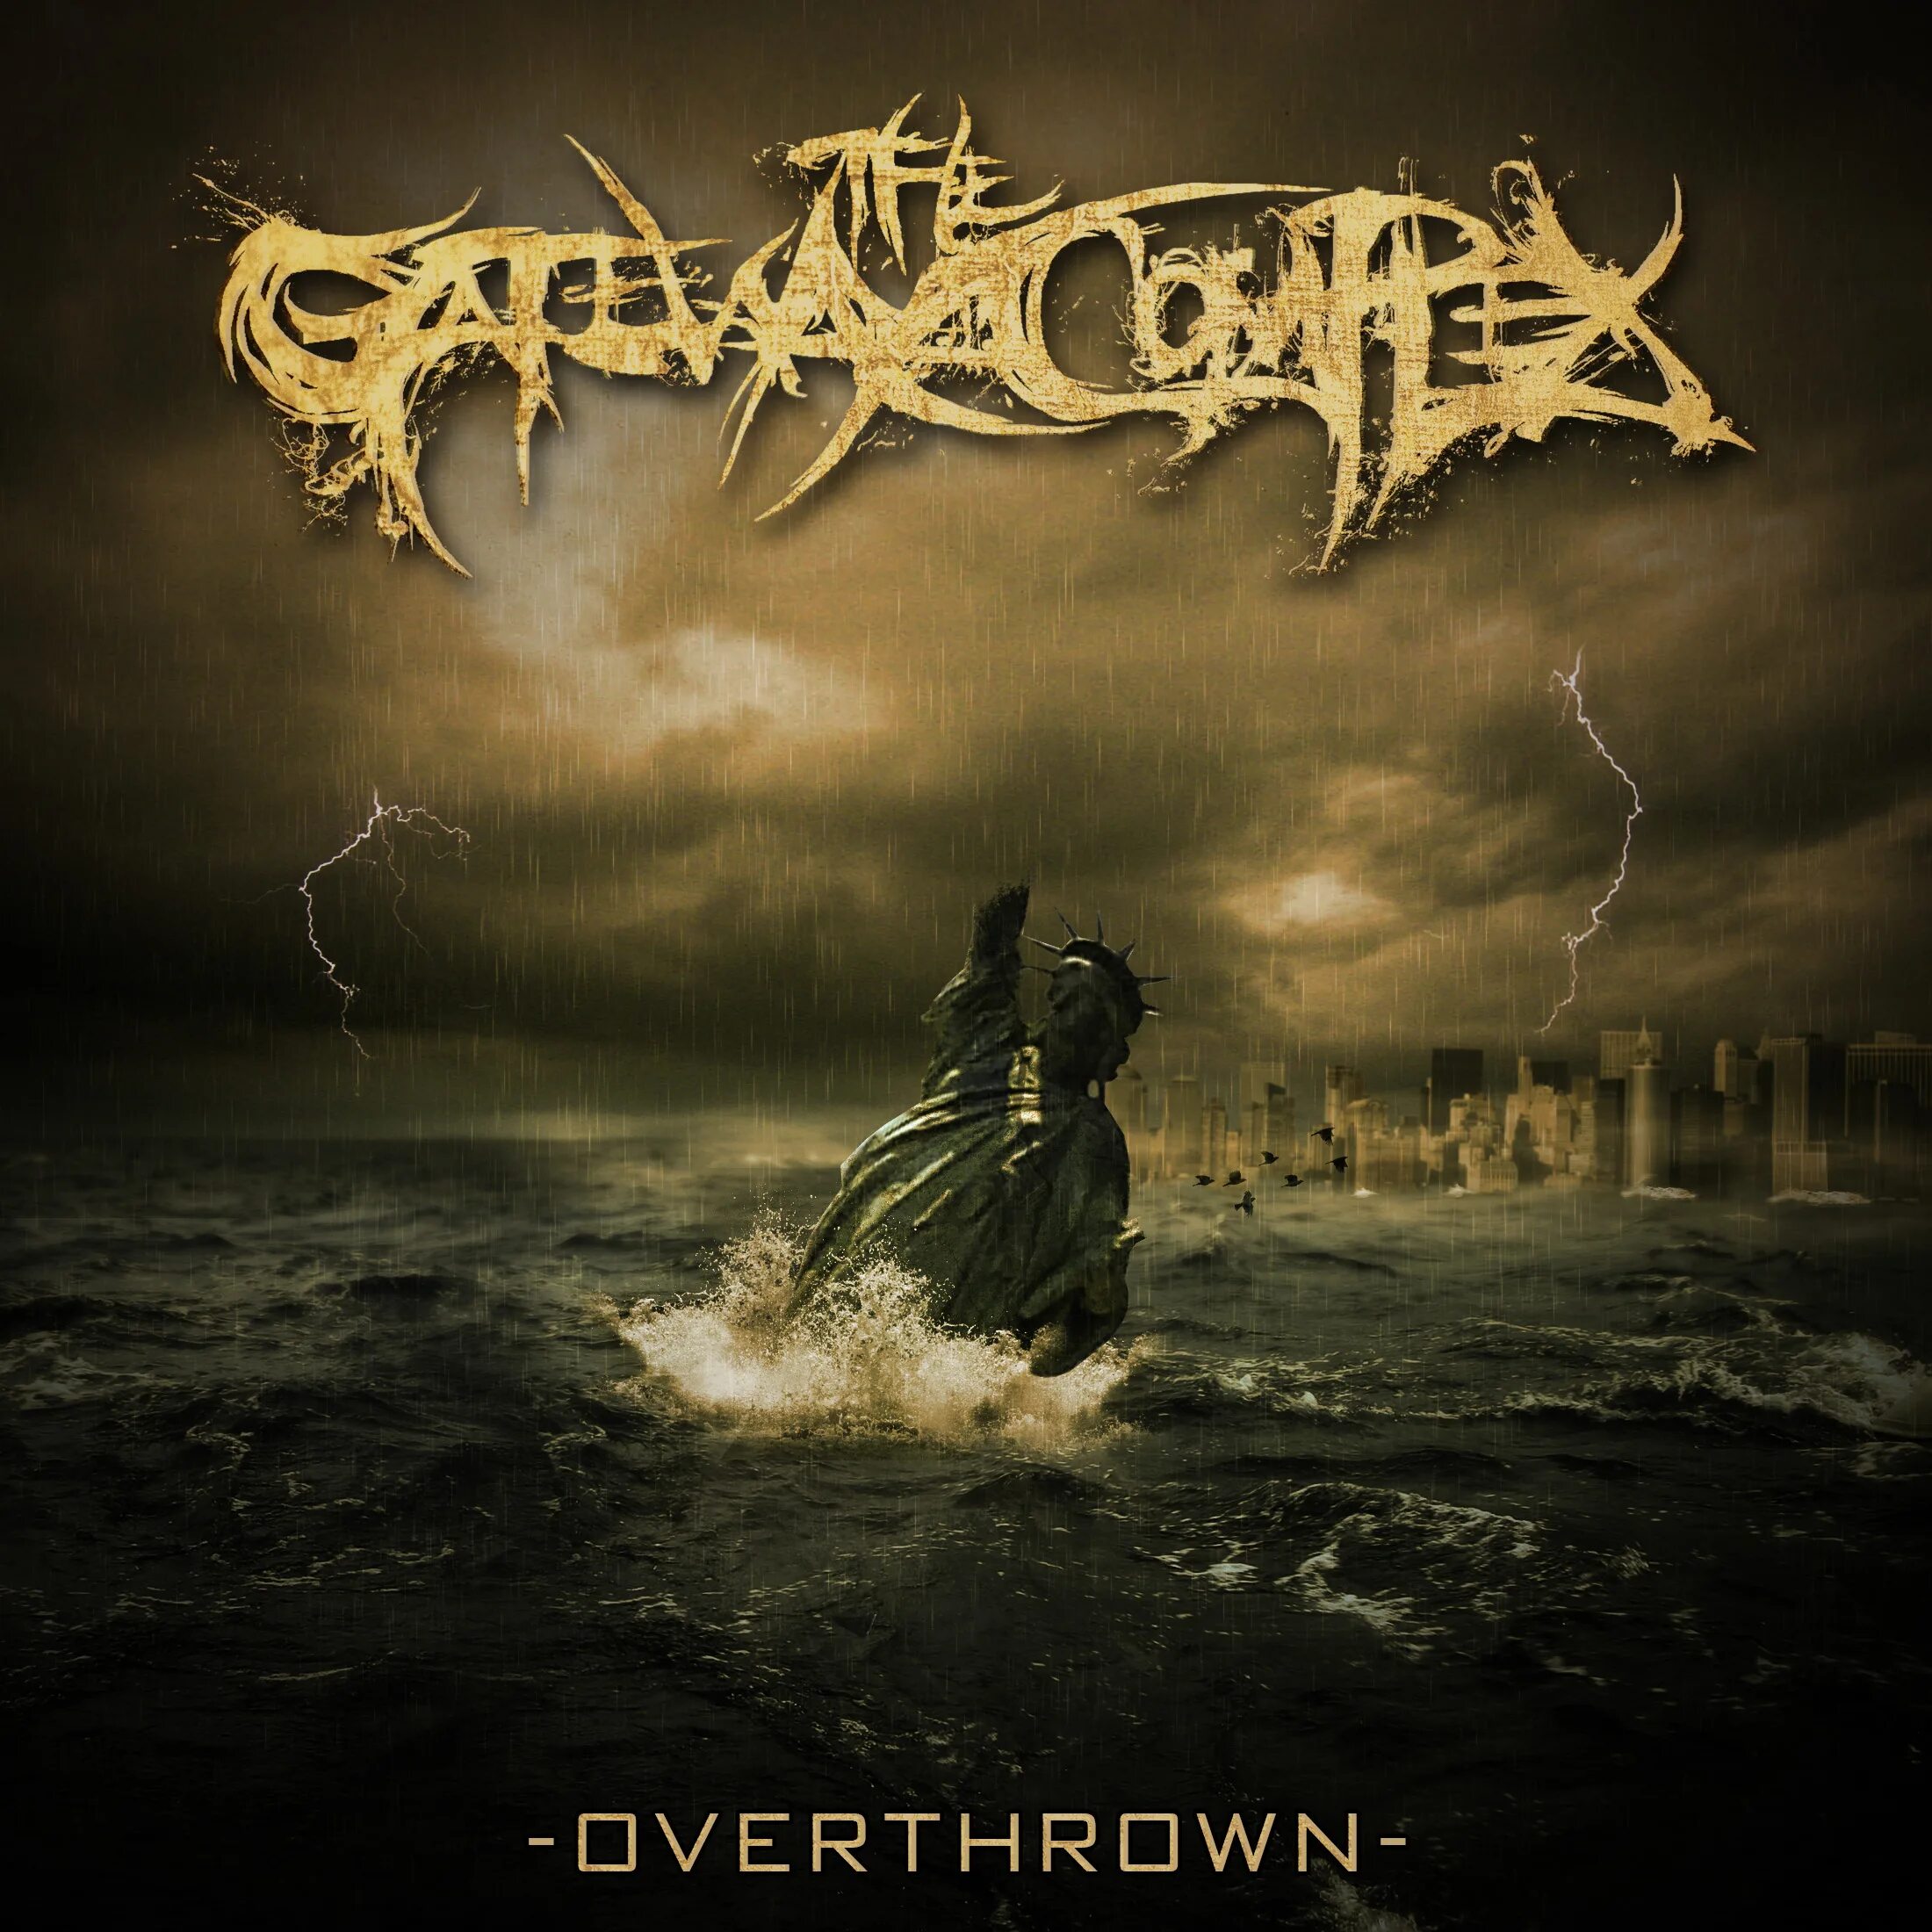 True roots. Группа overthrow. The Gateway Complex - Metal Band. The Complex album. Gateway to the World a2 диск.